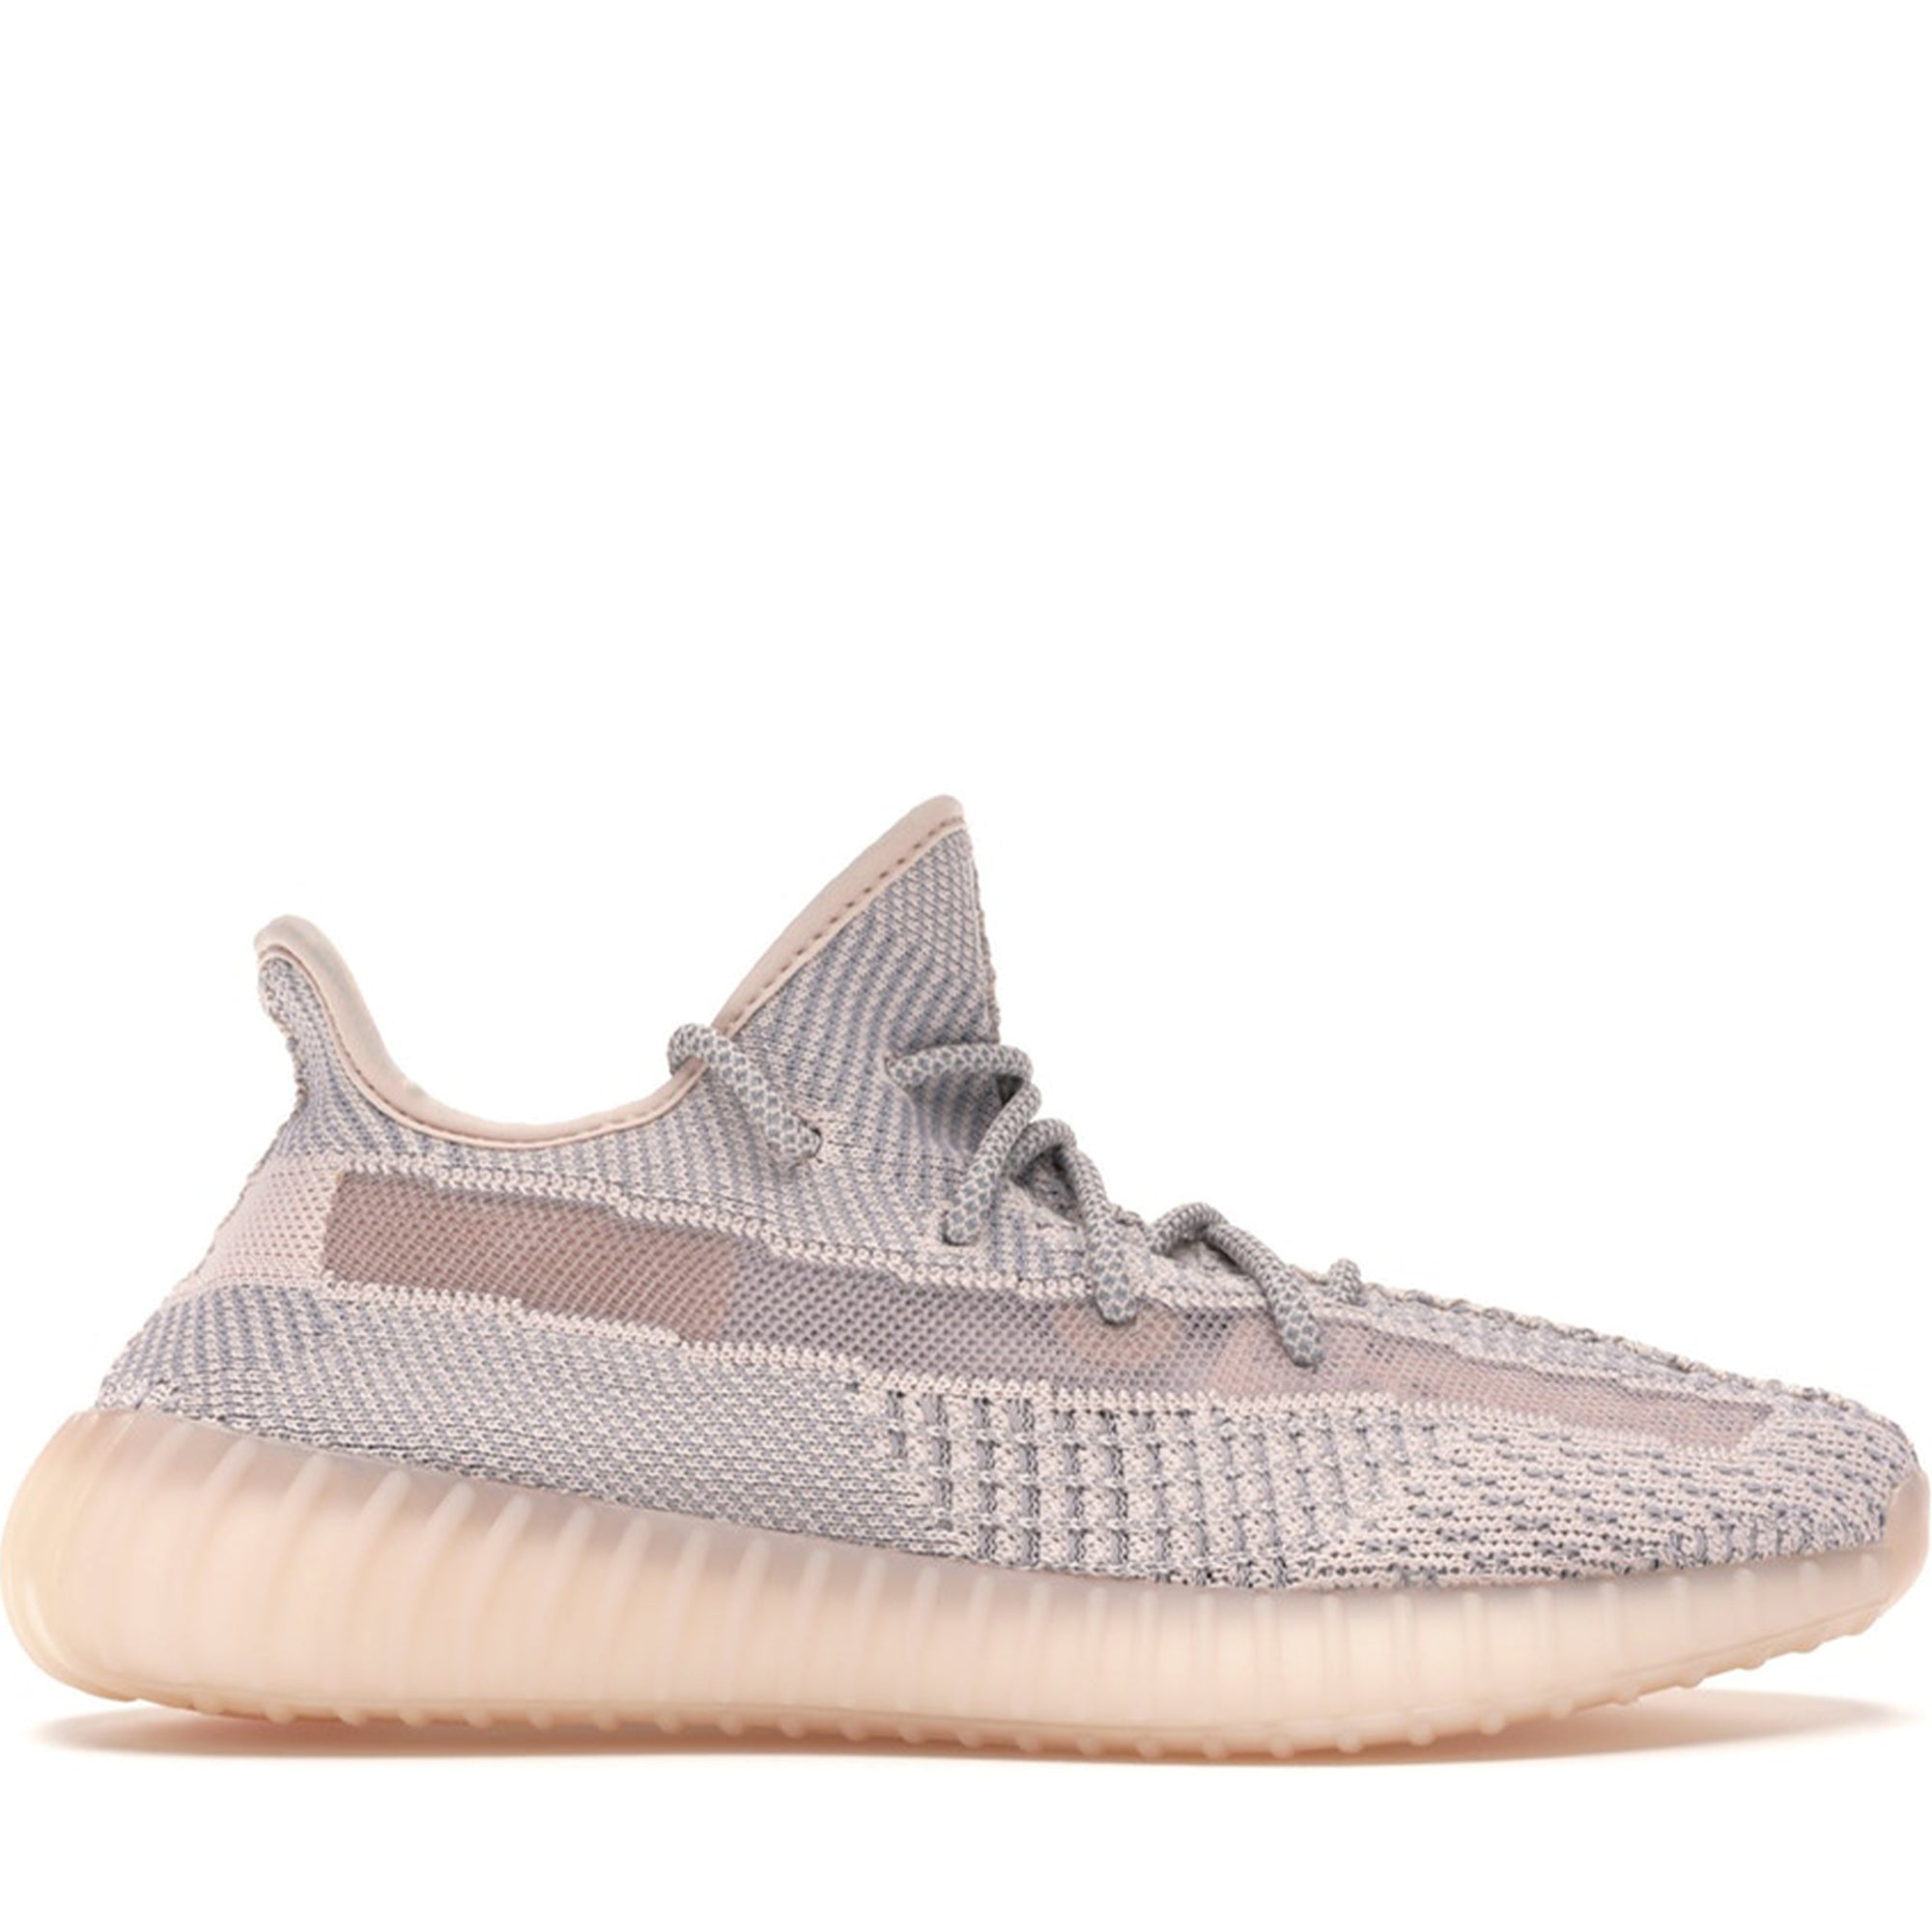 YEEZY Boost 350 Sneakers, Authenticity Guaranteed